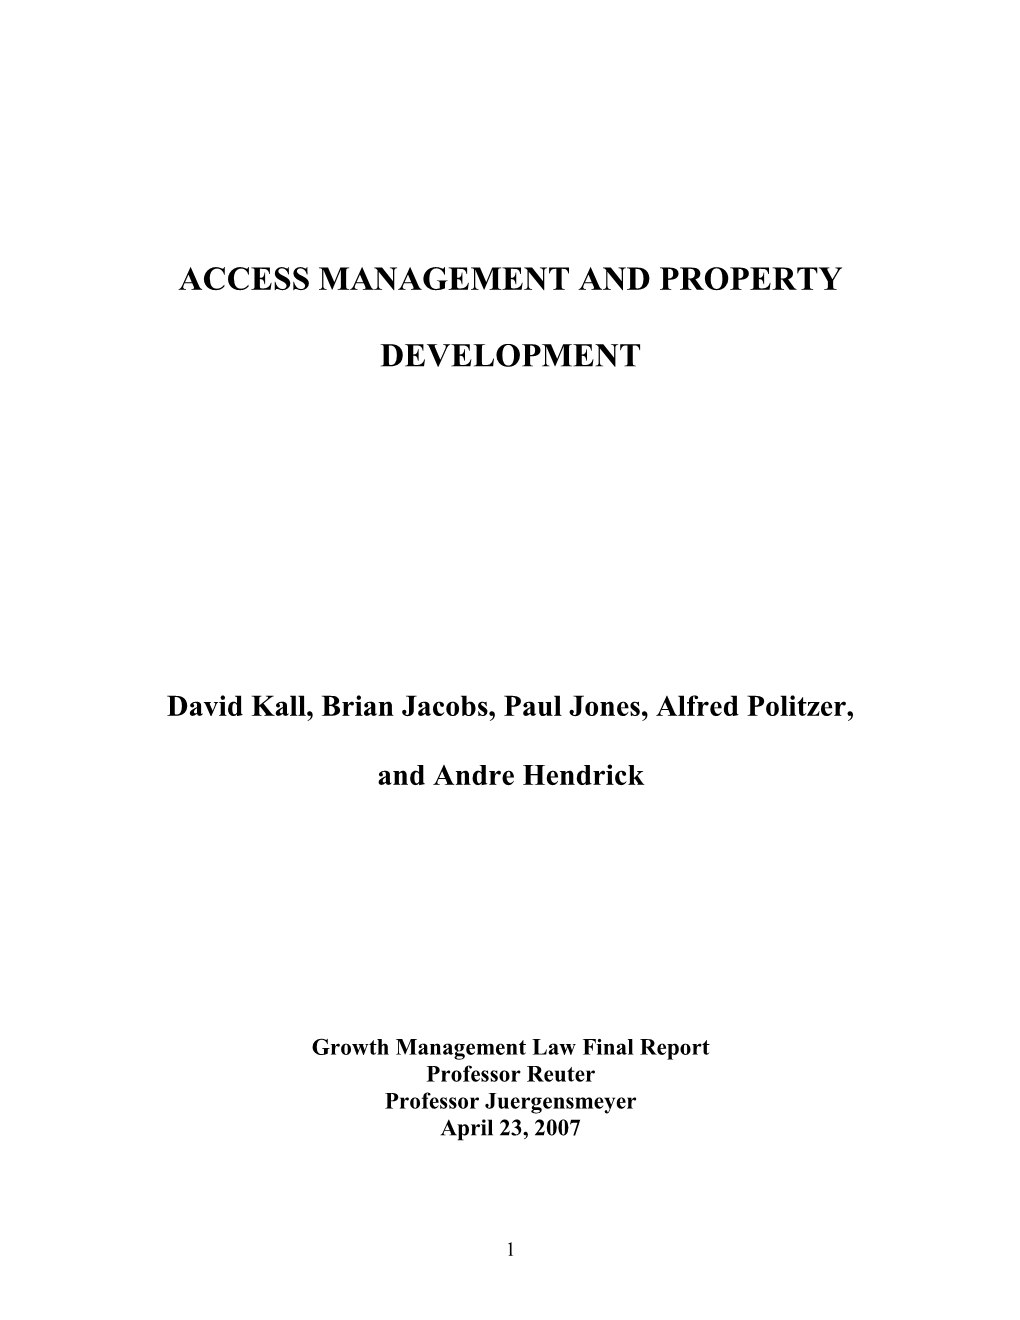 Access Management and Property